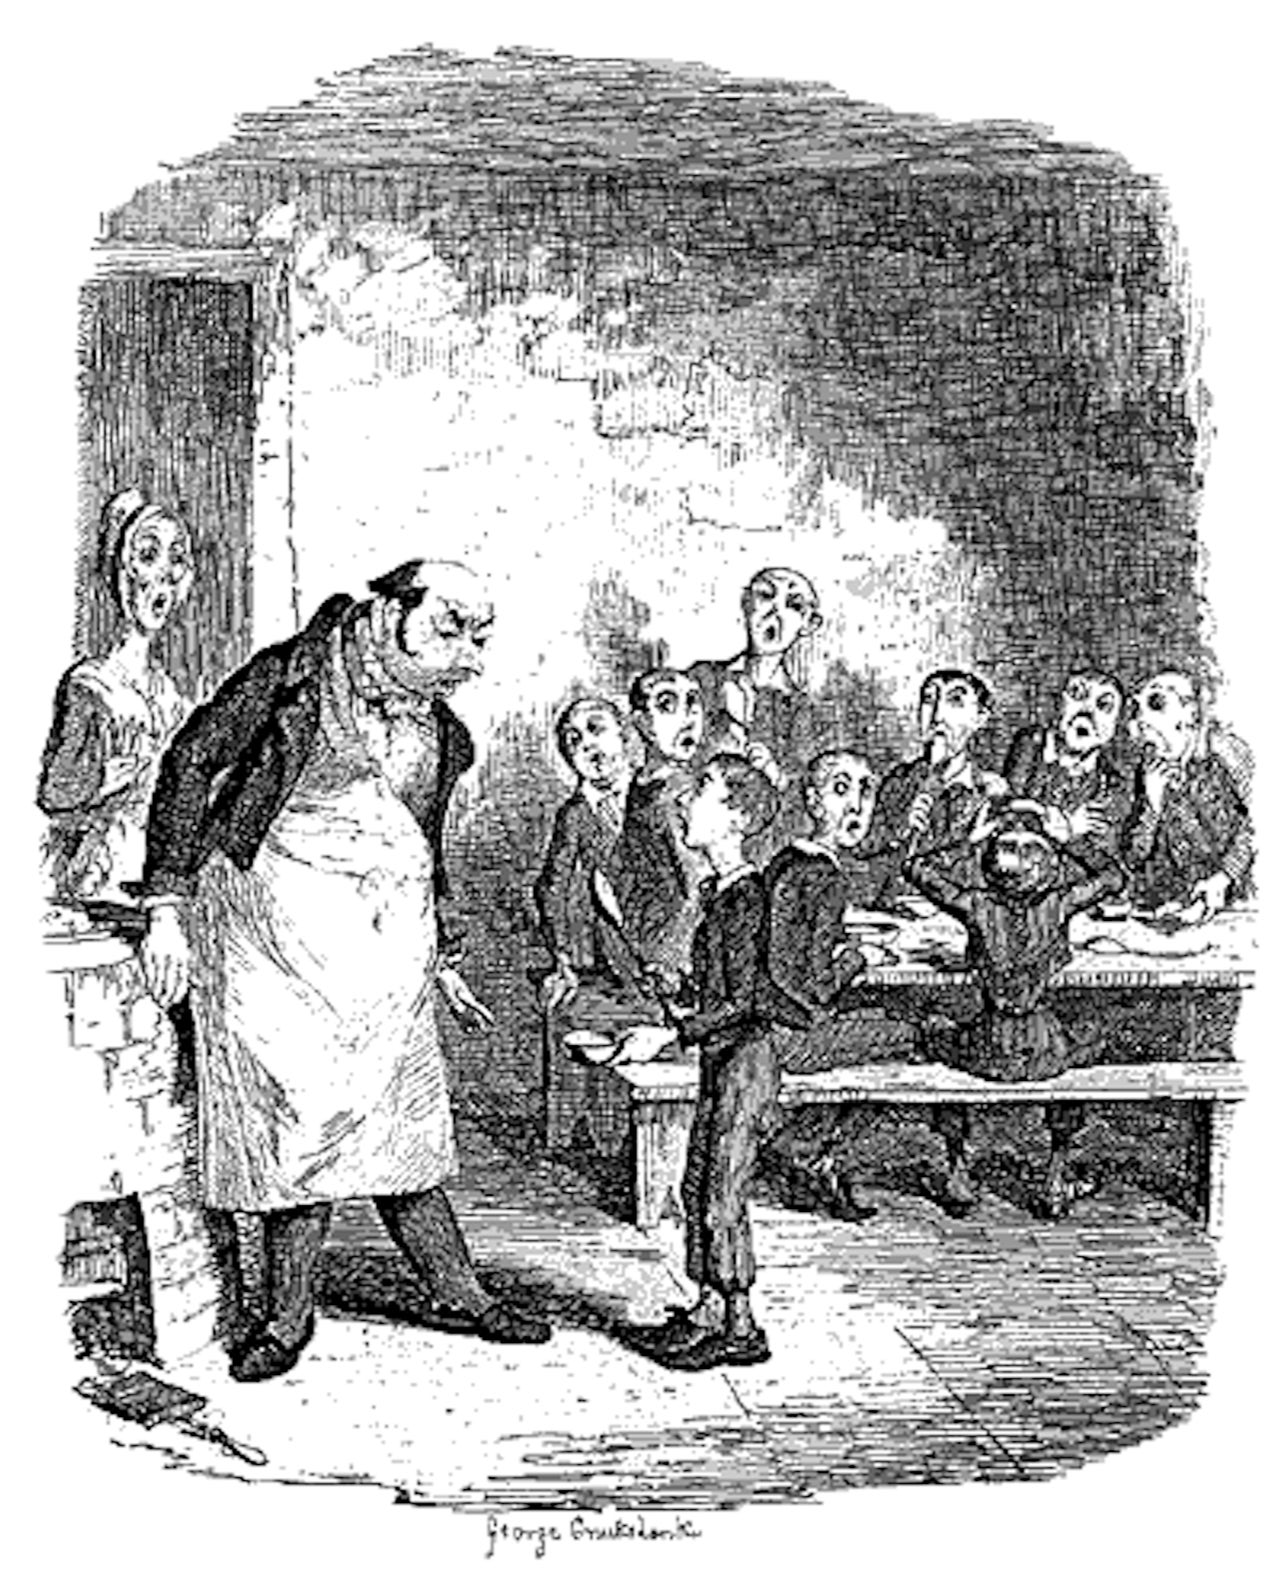 Oliver Twist asking for more food, illustrated by George Cruikshank